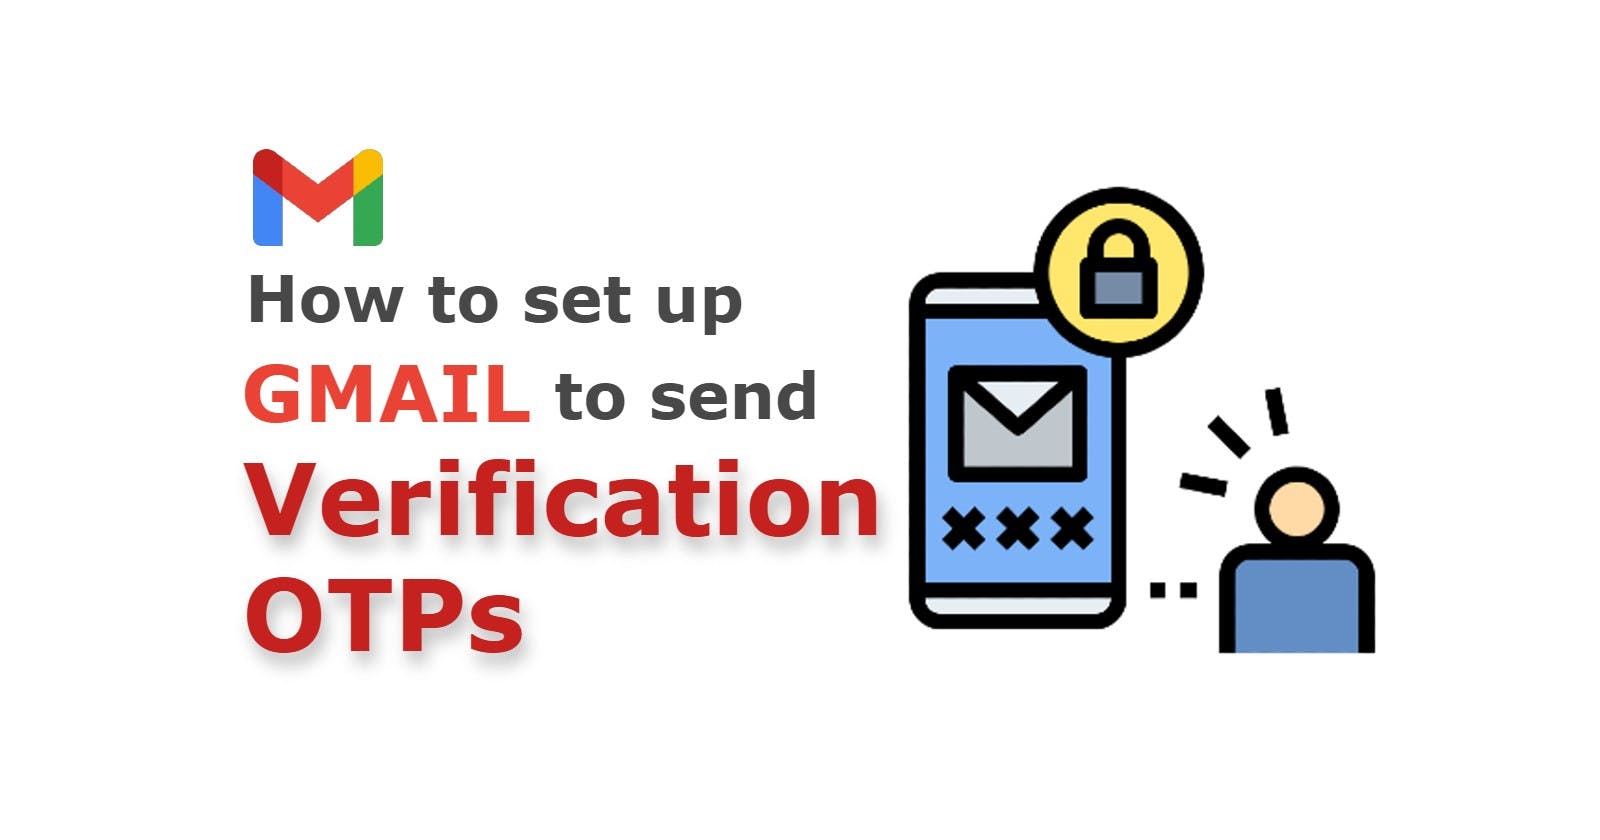 How to set up Gmail SMTP to Send Verification OTPs and Other Security Codes